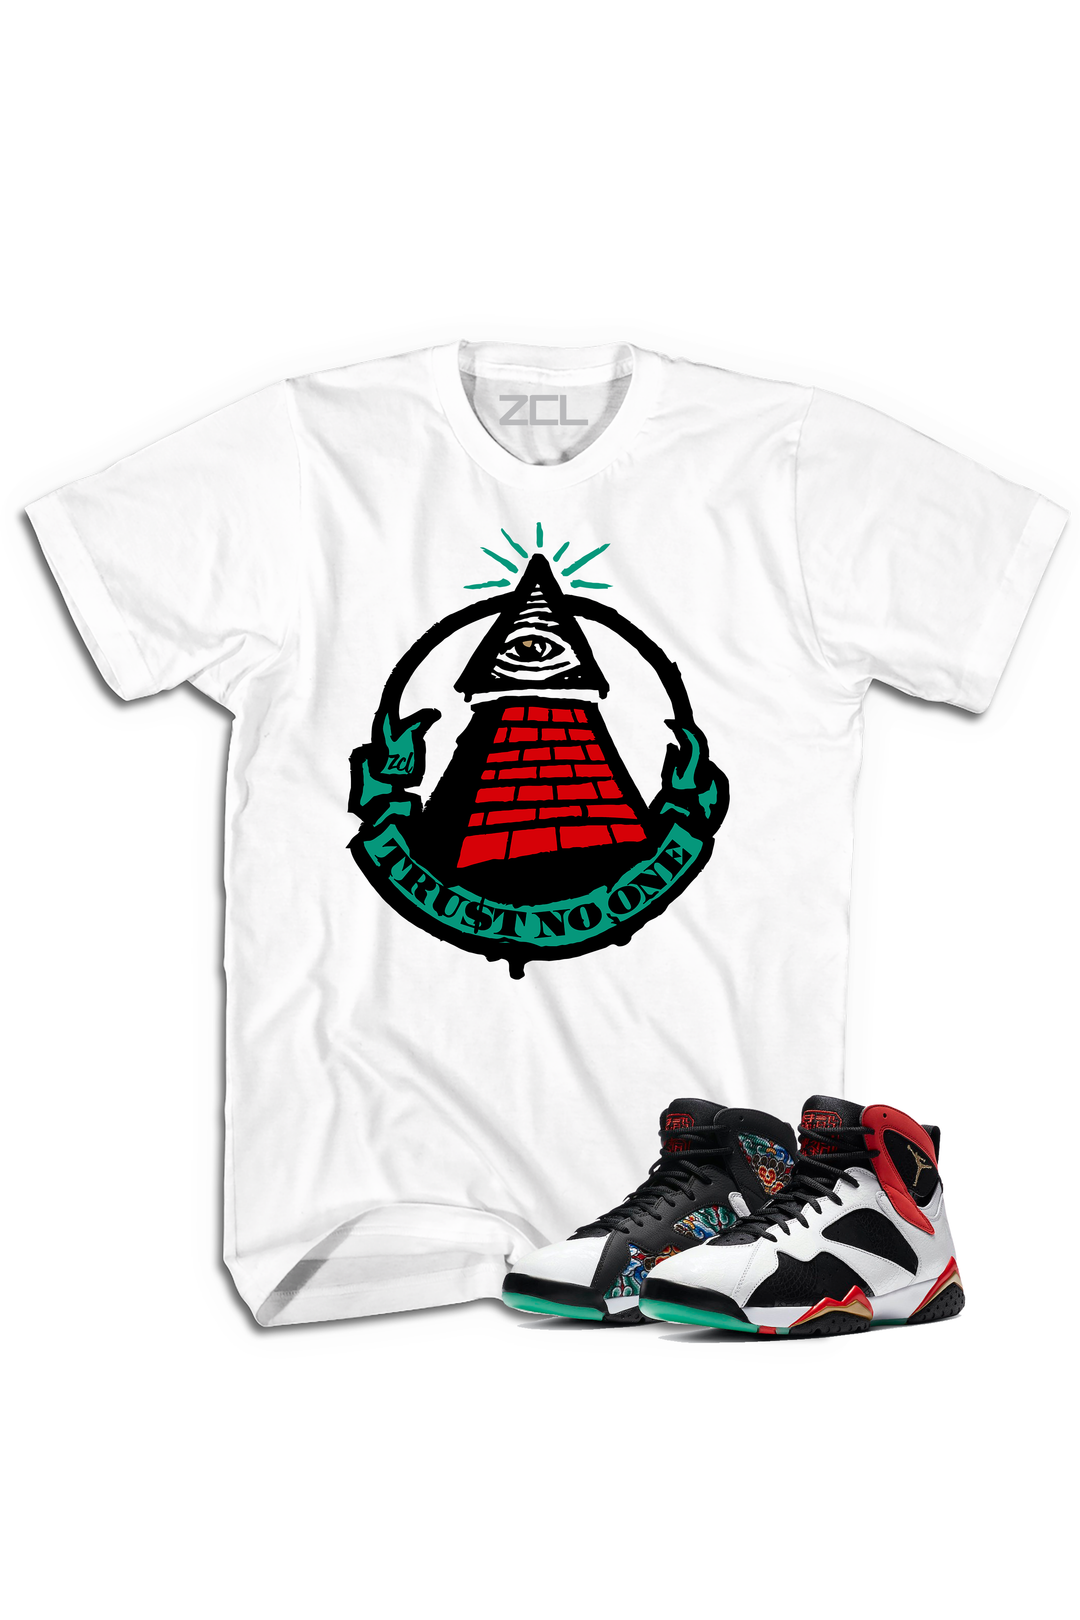 Air Jordan 7 China "Trust No One" Tee Chile Red - Zamage